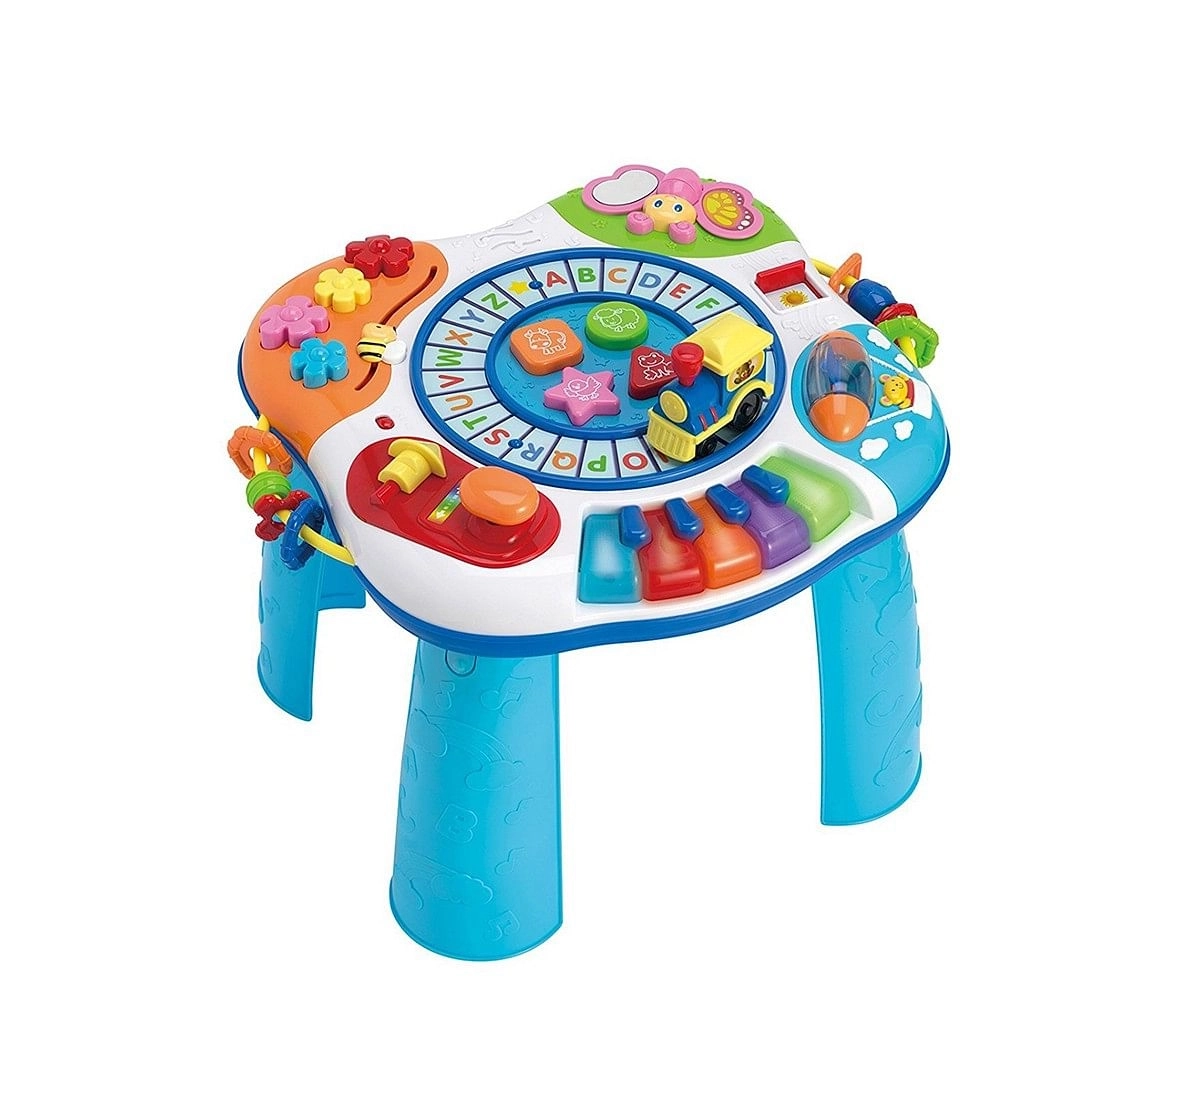 Winfun Letter Train And Piano Activity Table Baby Gear for Kids age 24M+ 